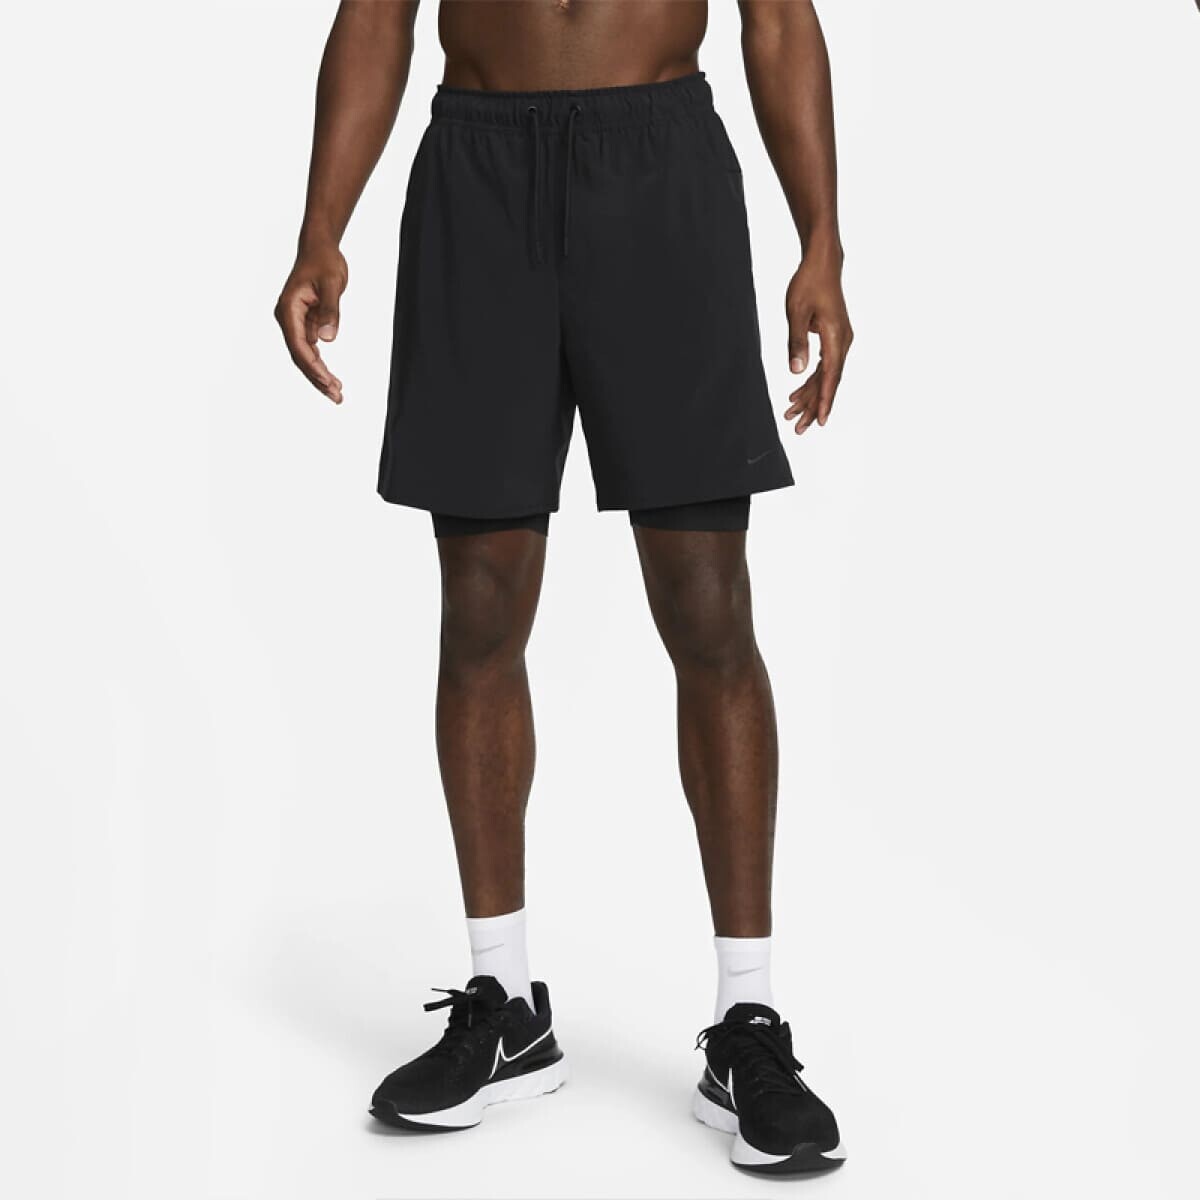 Short Nike Training Hombre Df Unlimited 7in 2in1 Black/Black - S/C 